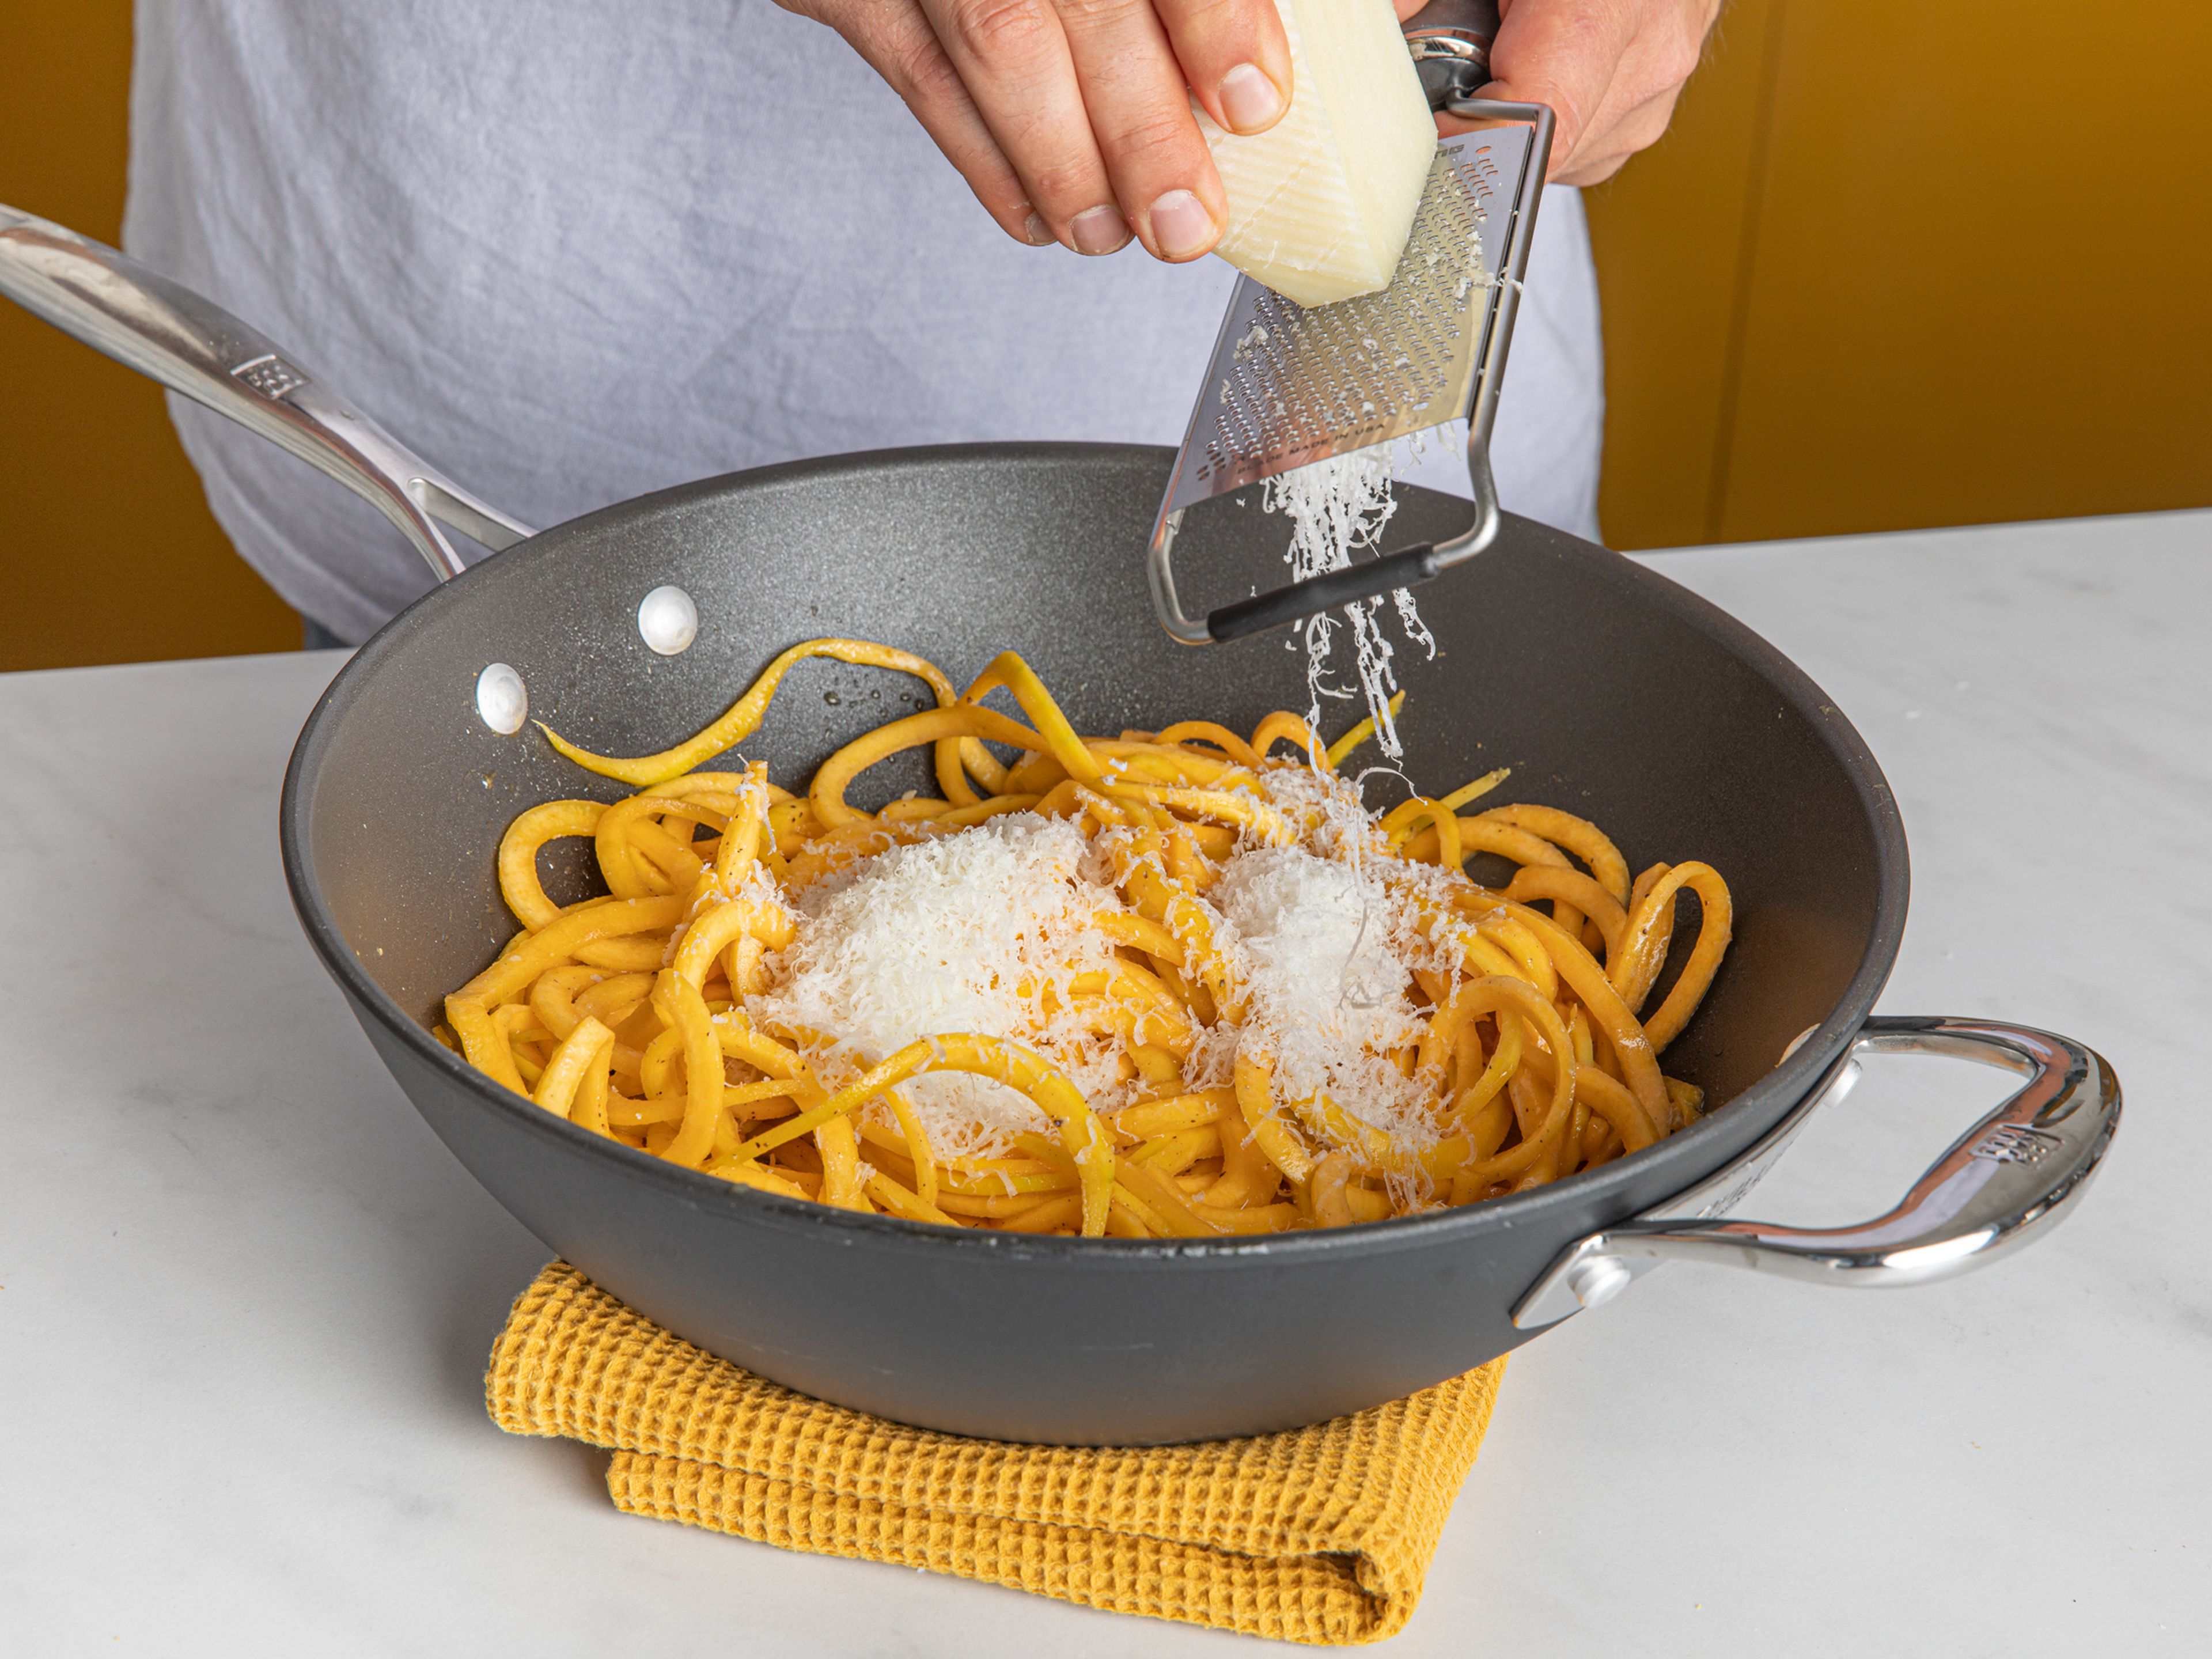 In a large frying pan over medium heat, melt butter. Add freshly ground black pepper and stir, letting toast for approx. 30 sec. Add some water, then add the squash noodles and miso. Toss to combine, then remove from heat when ready and add grated pecorino and remaining butter. Toss well until noodles are coated in the sauce, then season to taste with salt and serve immediately. Enjoy!